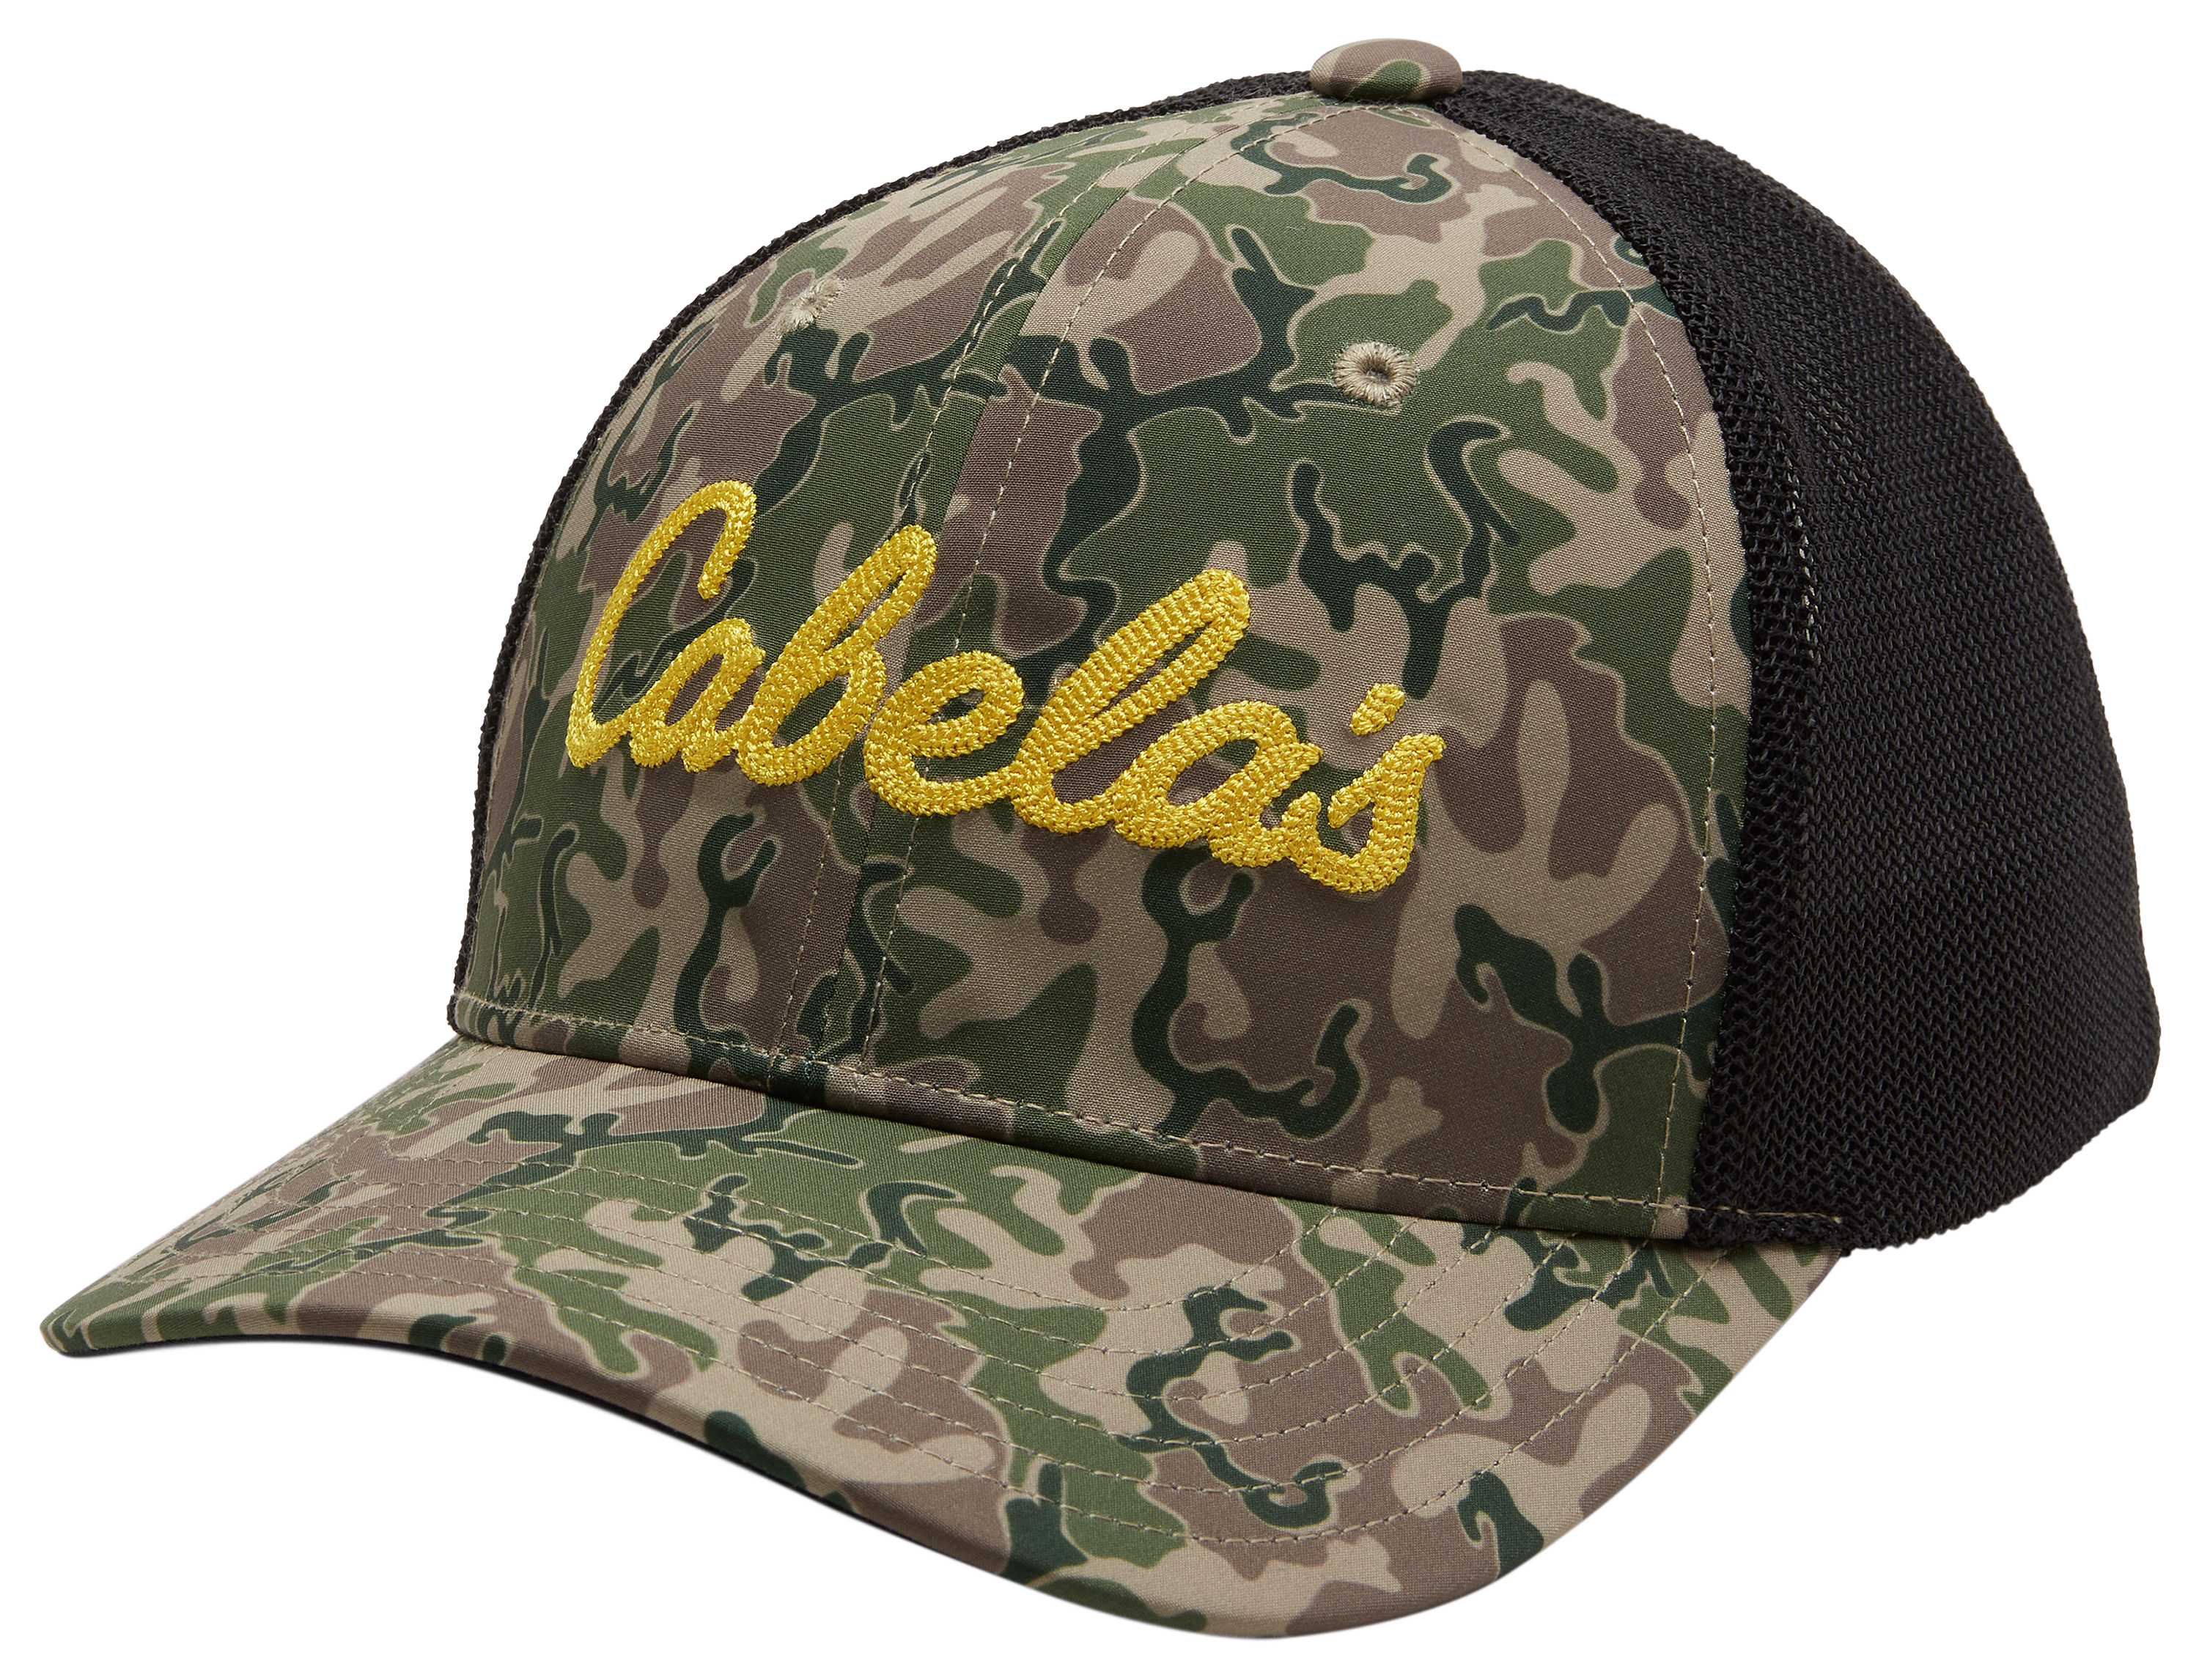 Cabelas Club Hat Rn 56835 One Size Fits Most Cap Green With Yellow Lettering